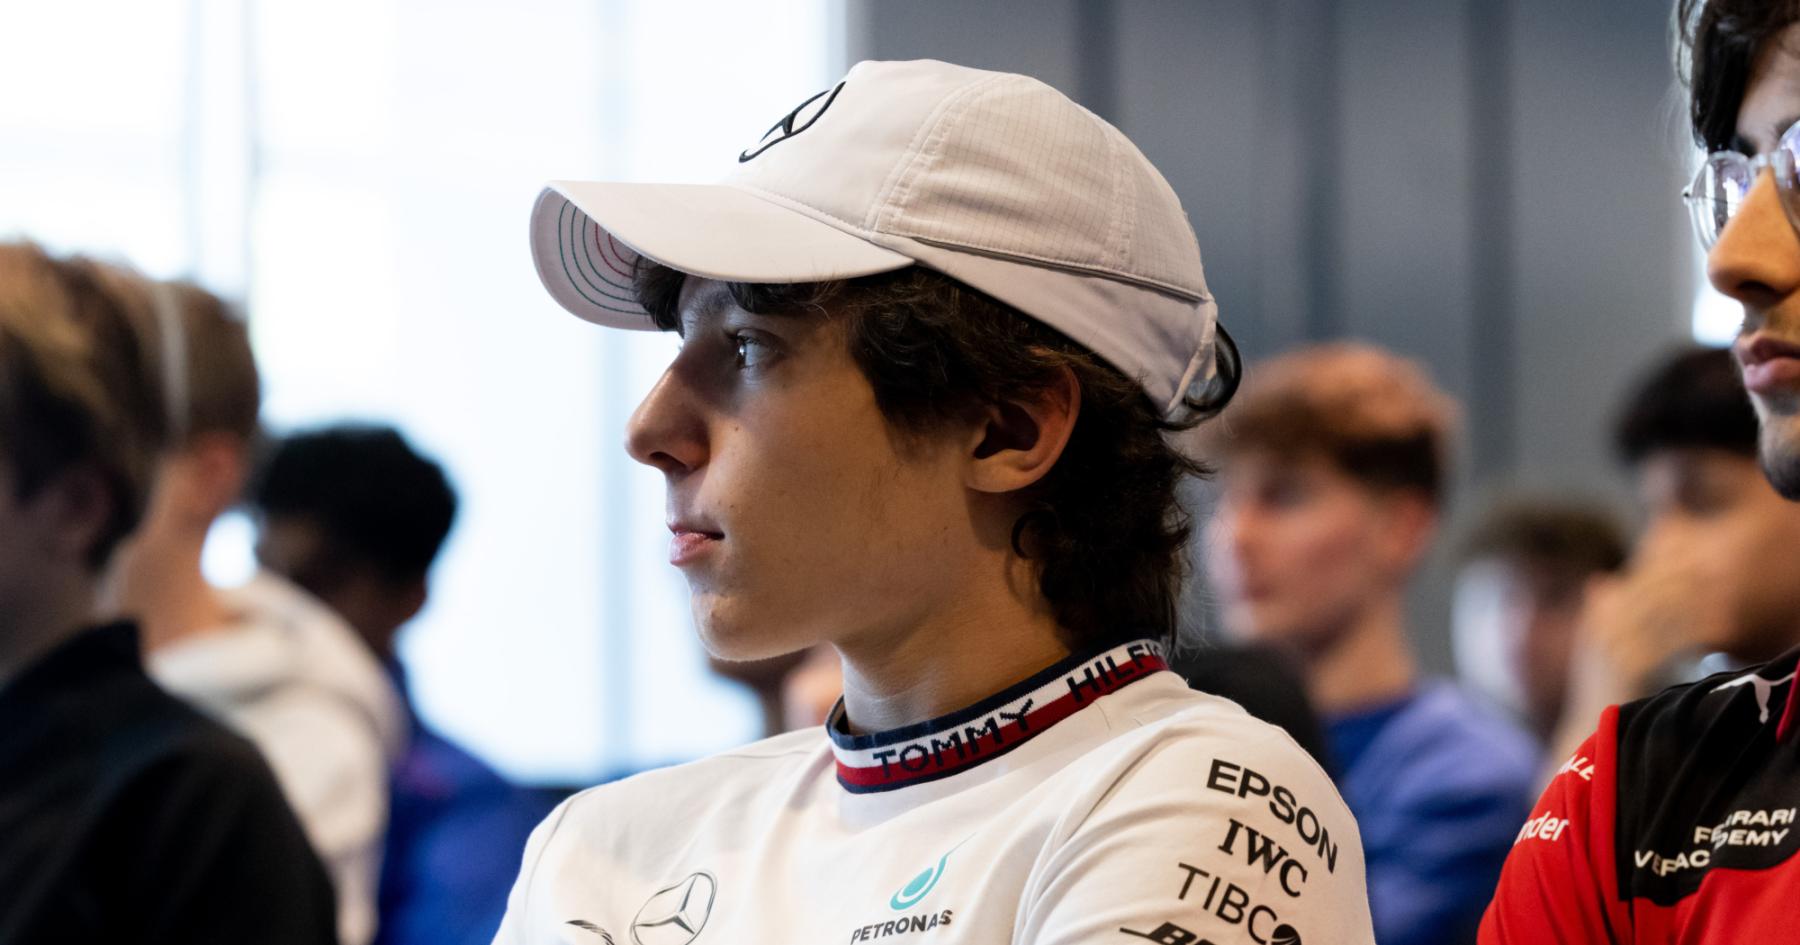 Wolff Paves the Way for Mercedes' Rising Star in F1